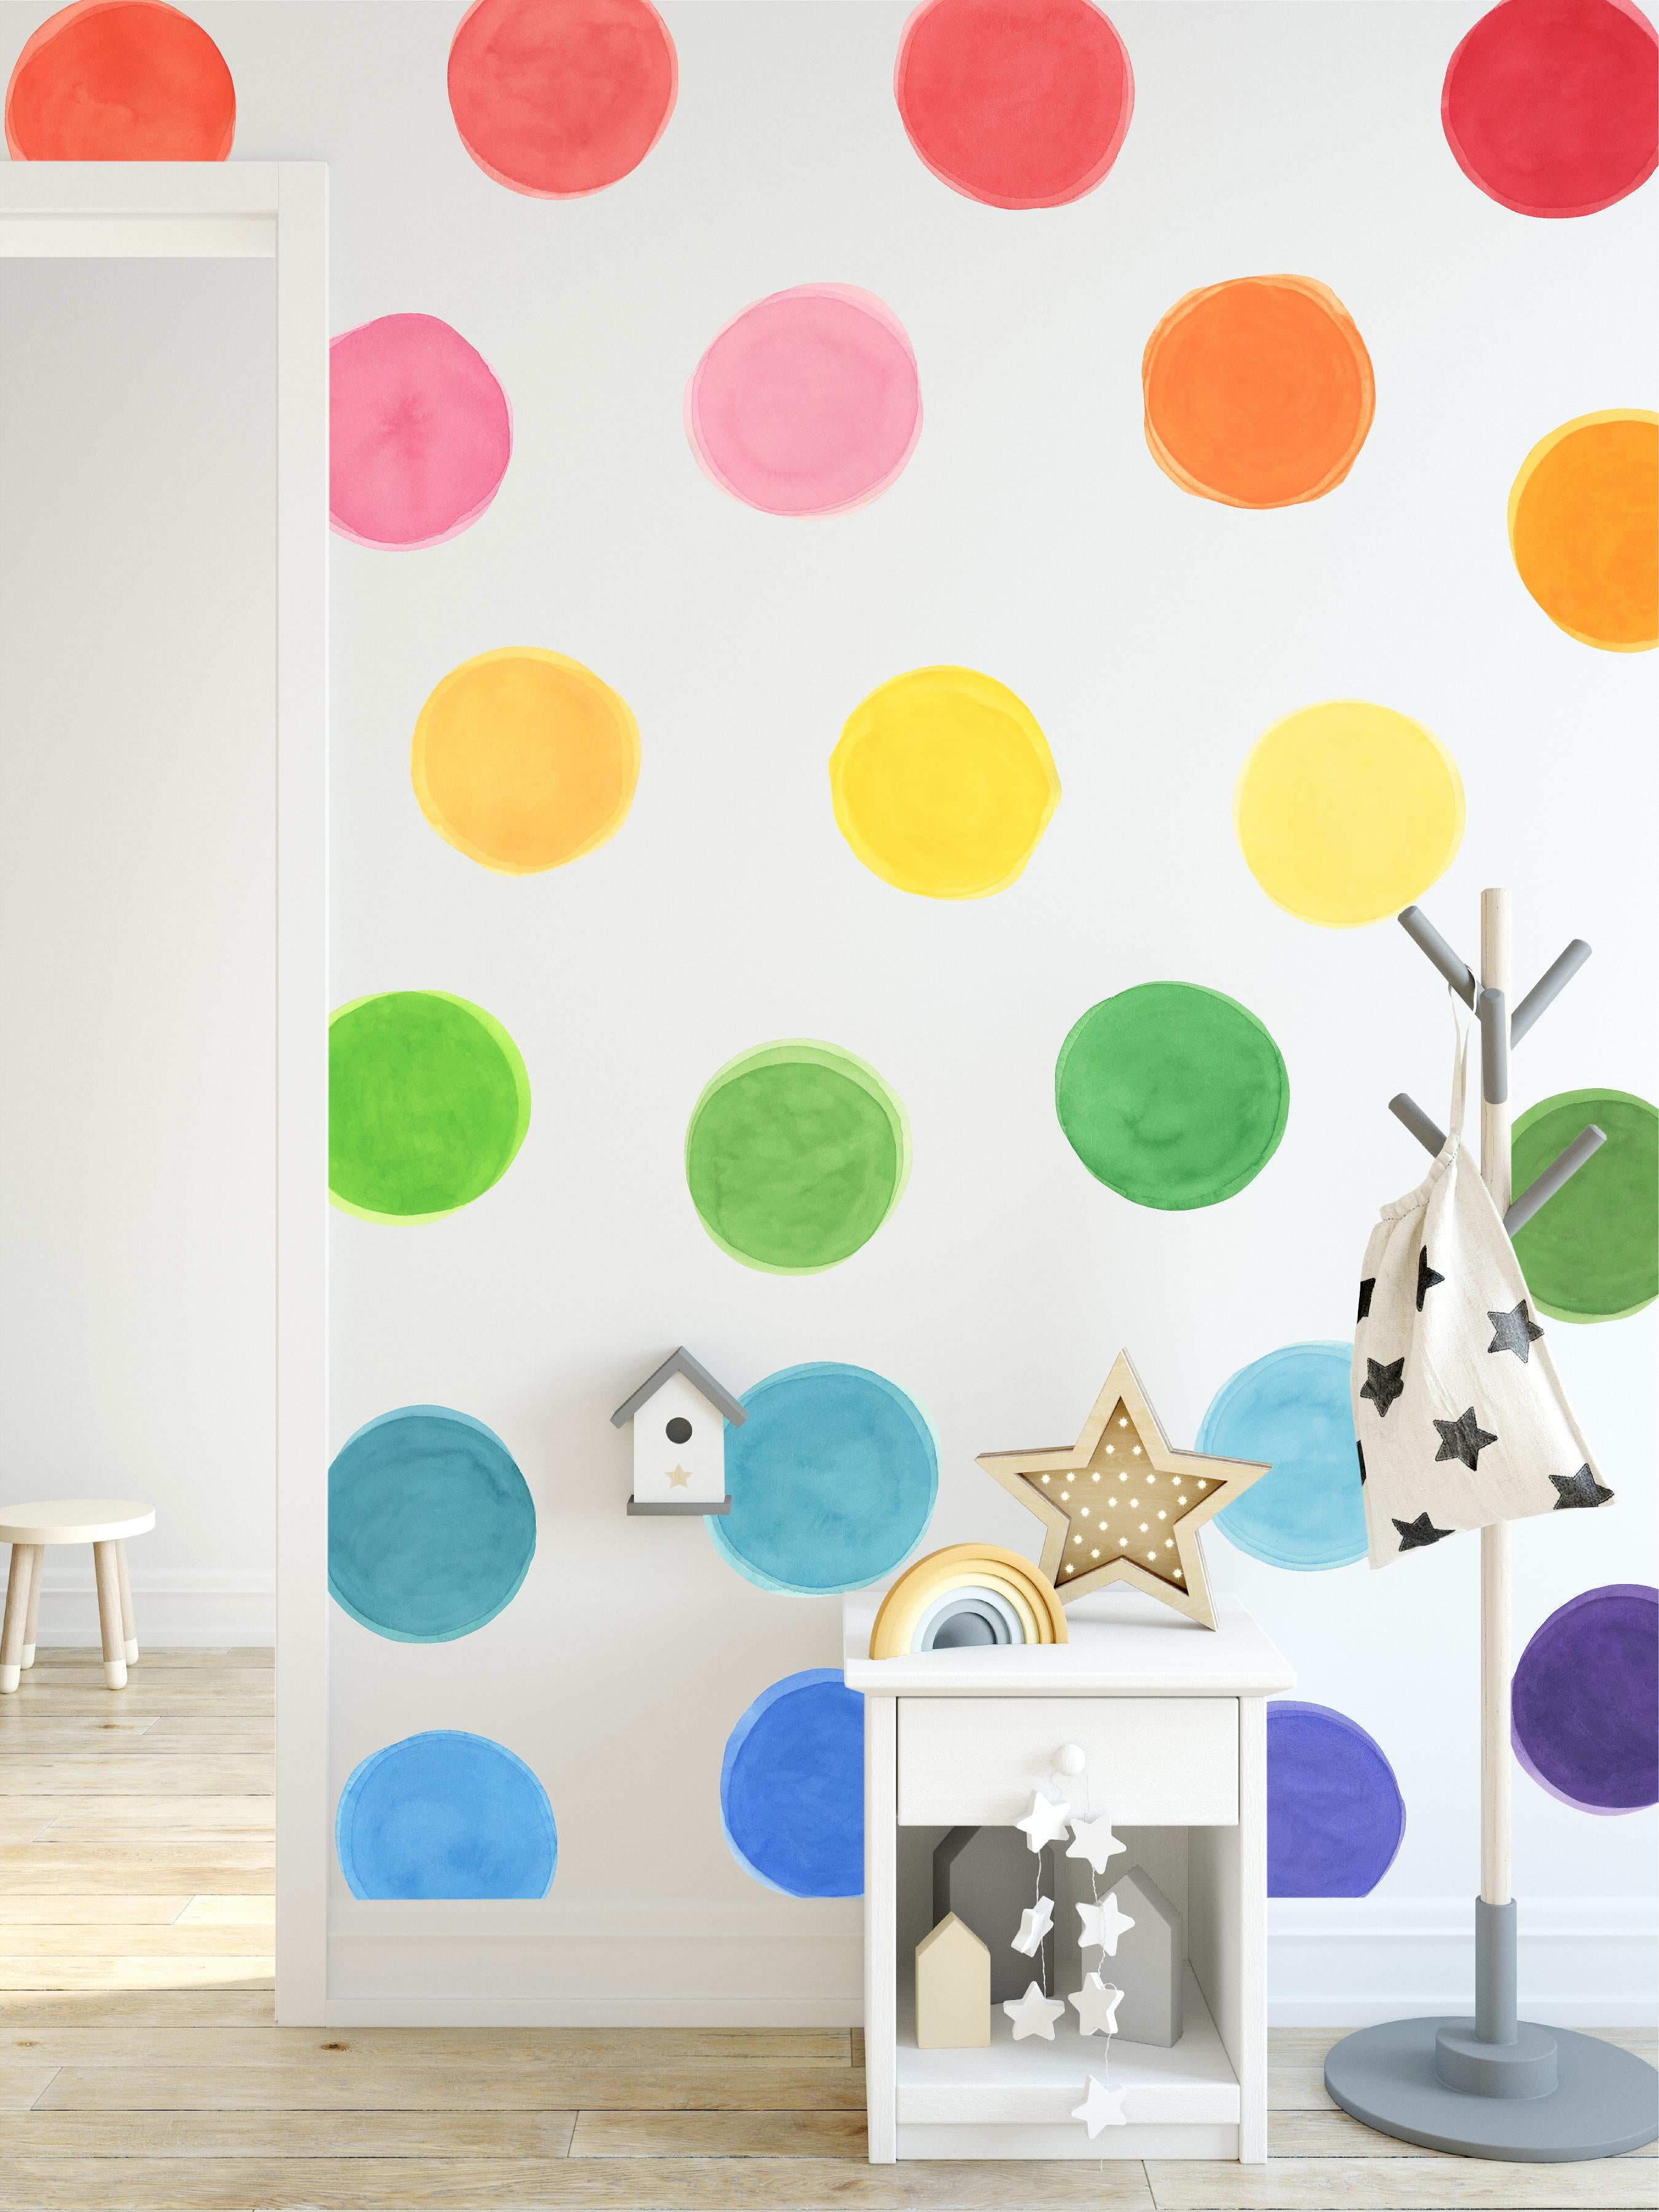 X-LARGE Watercolor Rainbow Dots Wall Decal Set • 36 Dots • Removable Fabric Wall Stickers • Colors of the Rainbow Collection